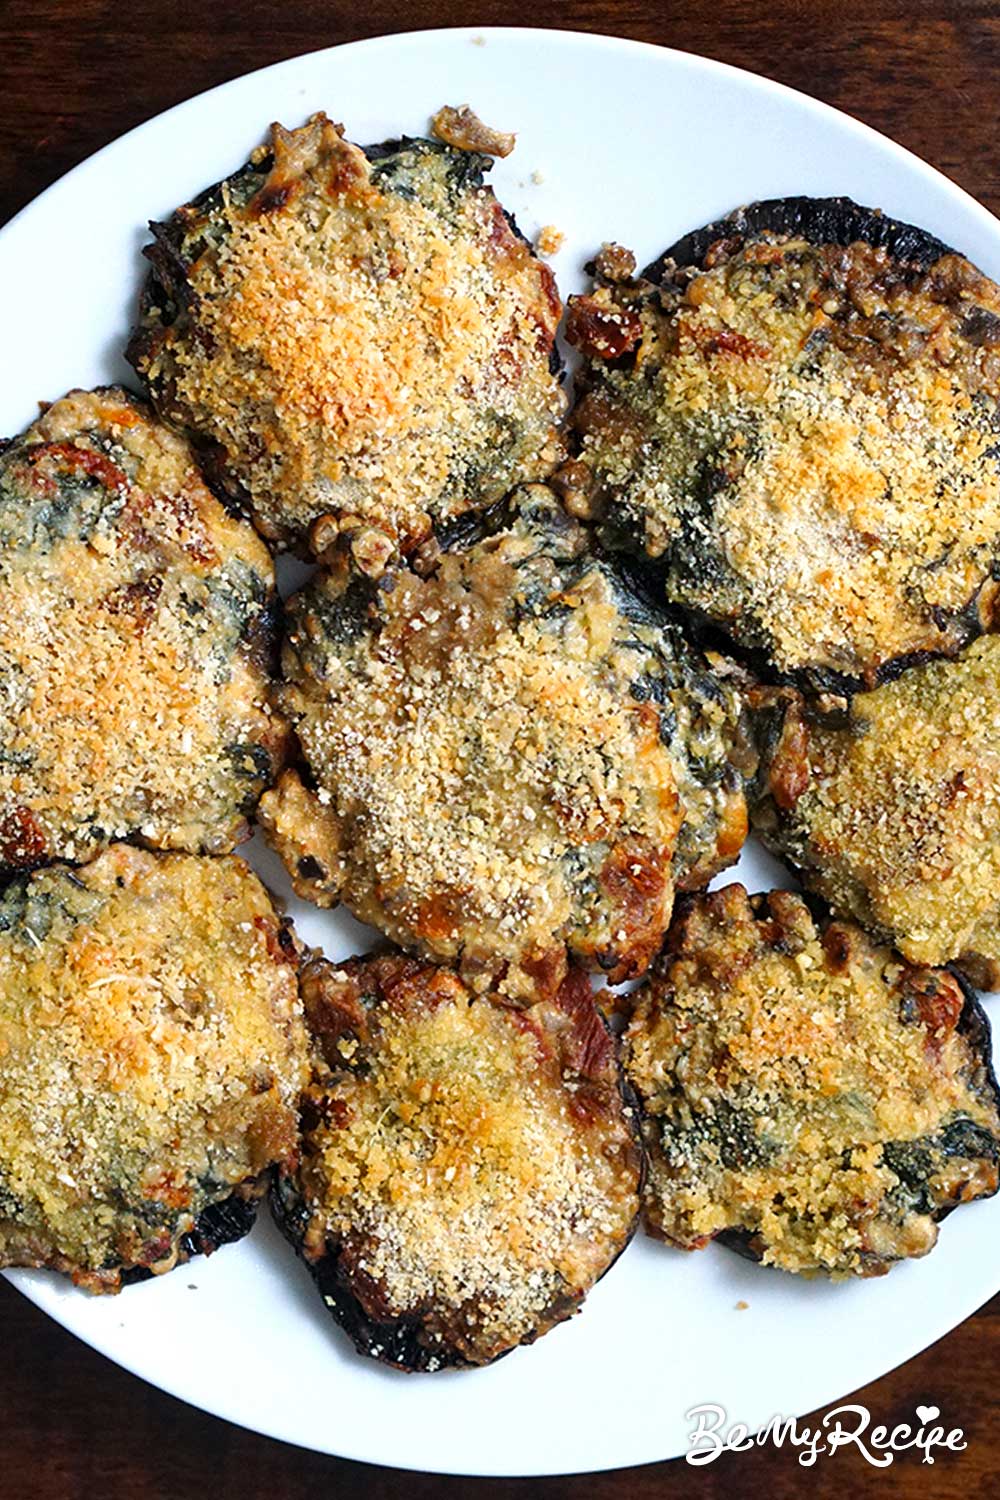 Stuffed Mushrooms with Ricotta, Parmesan, Spinach and Sundried Tomatoes